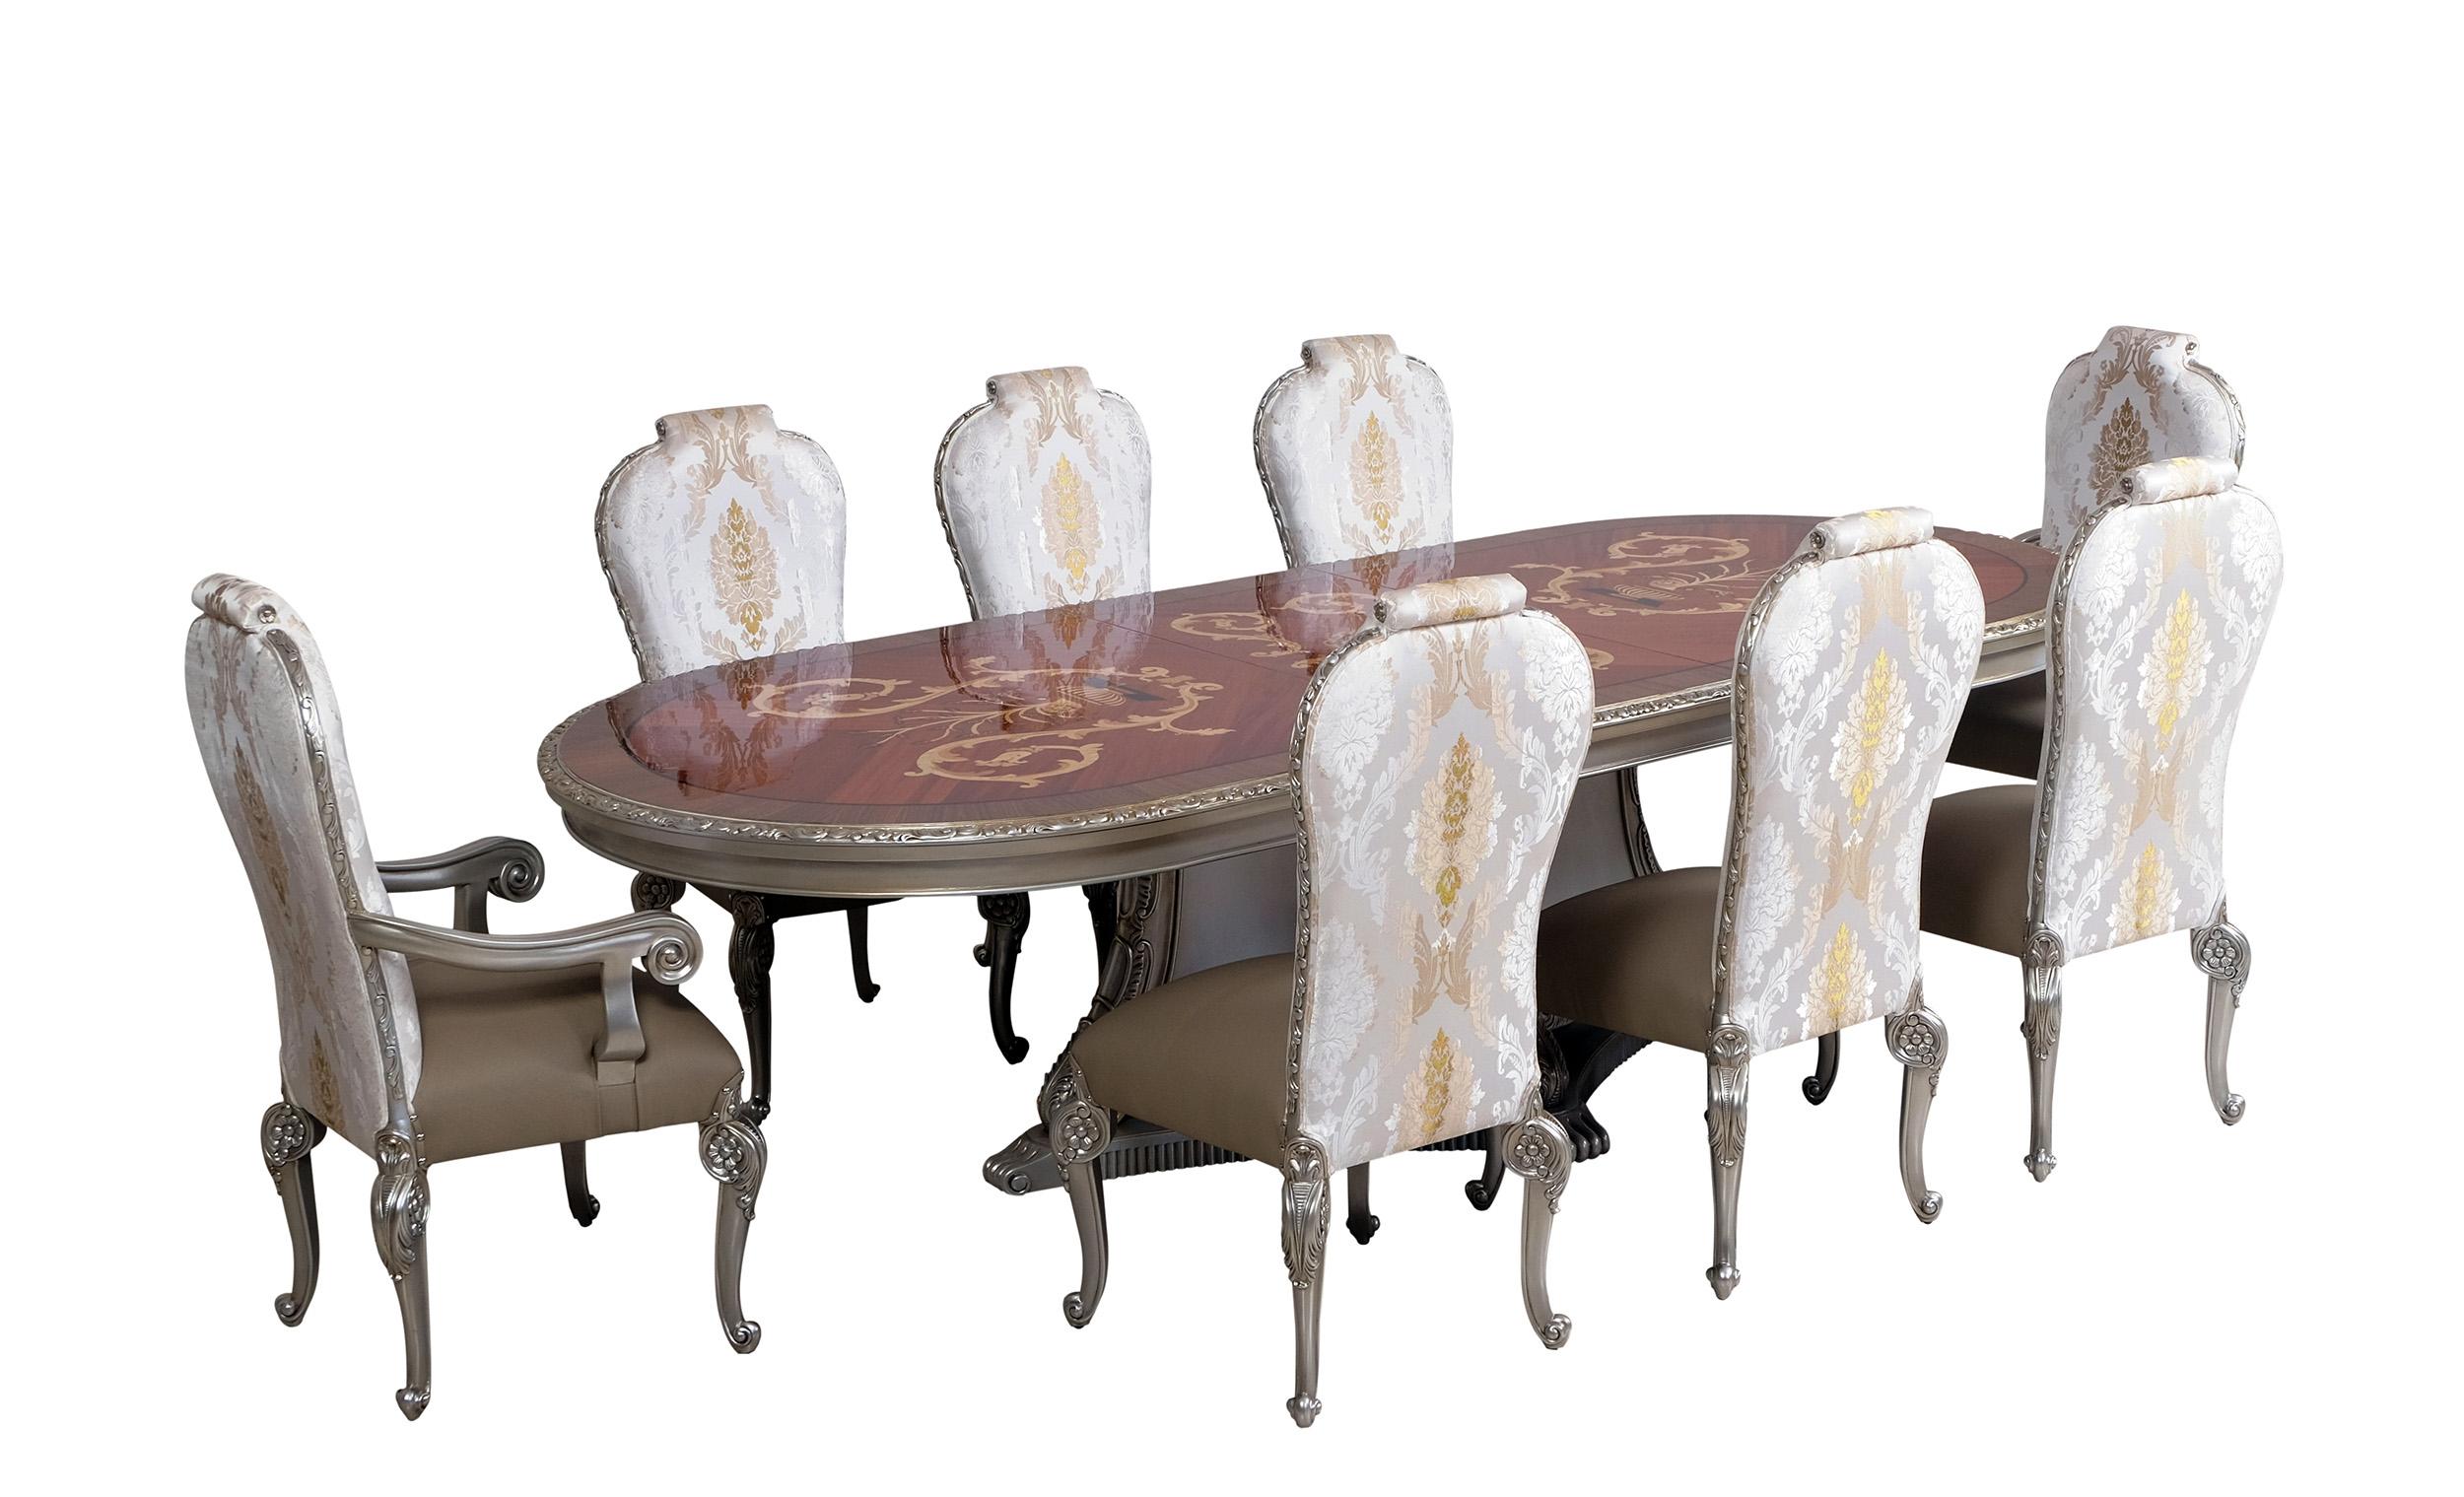 Contemporary, Modern Dining Table Set BELLAGIO 40050-DT-Set-9 in Antique Silver, Ebony, Gold Leather